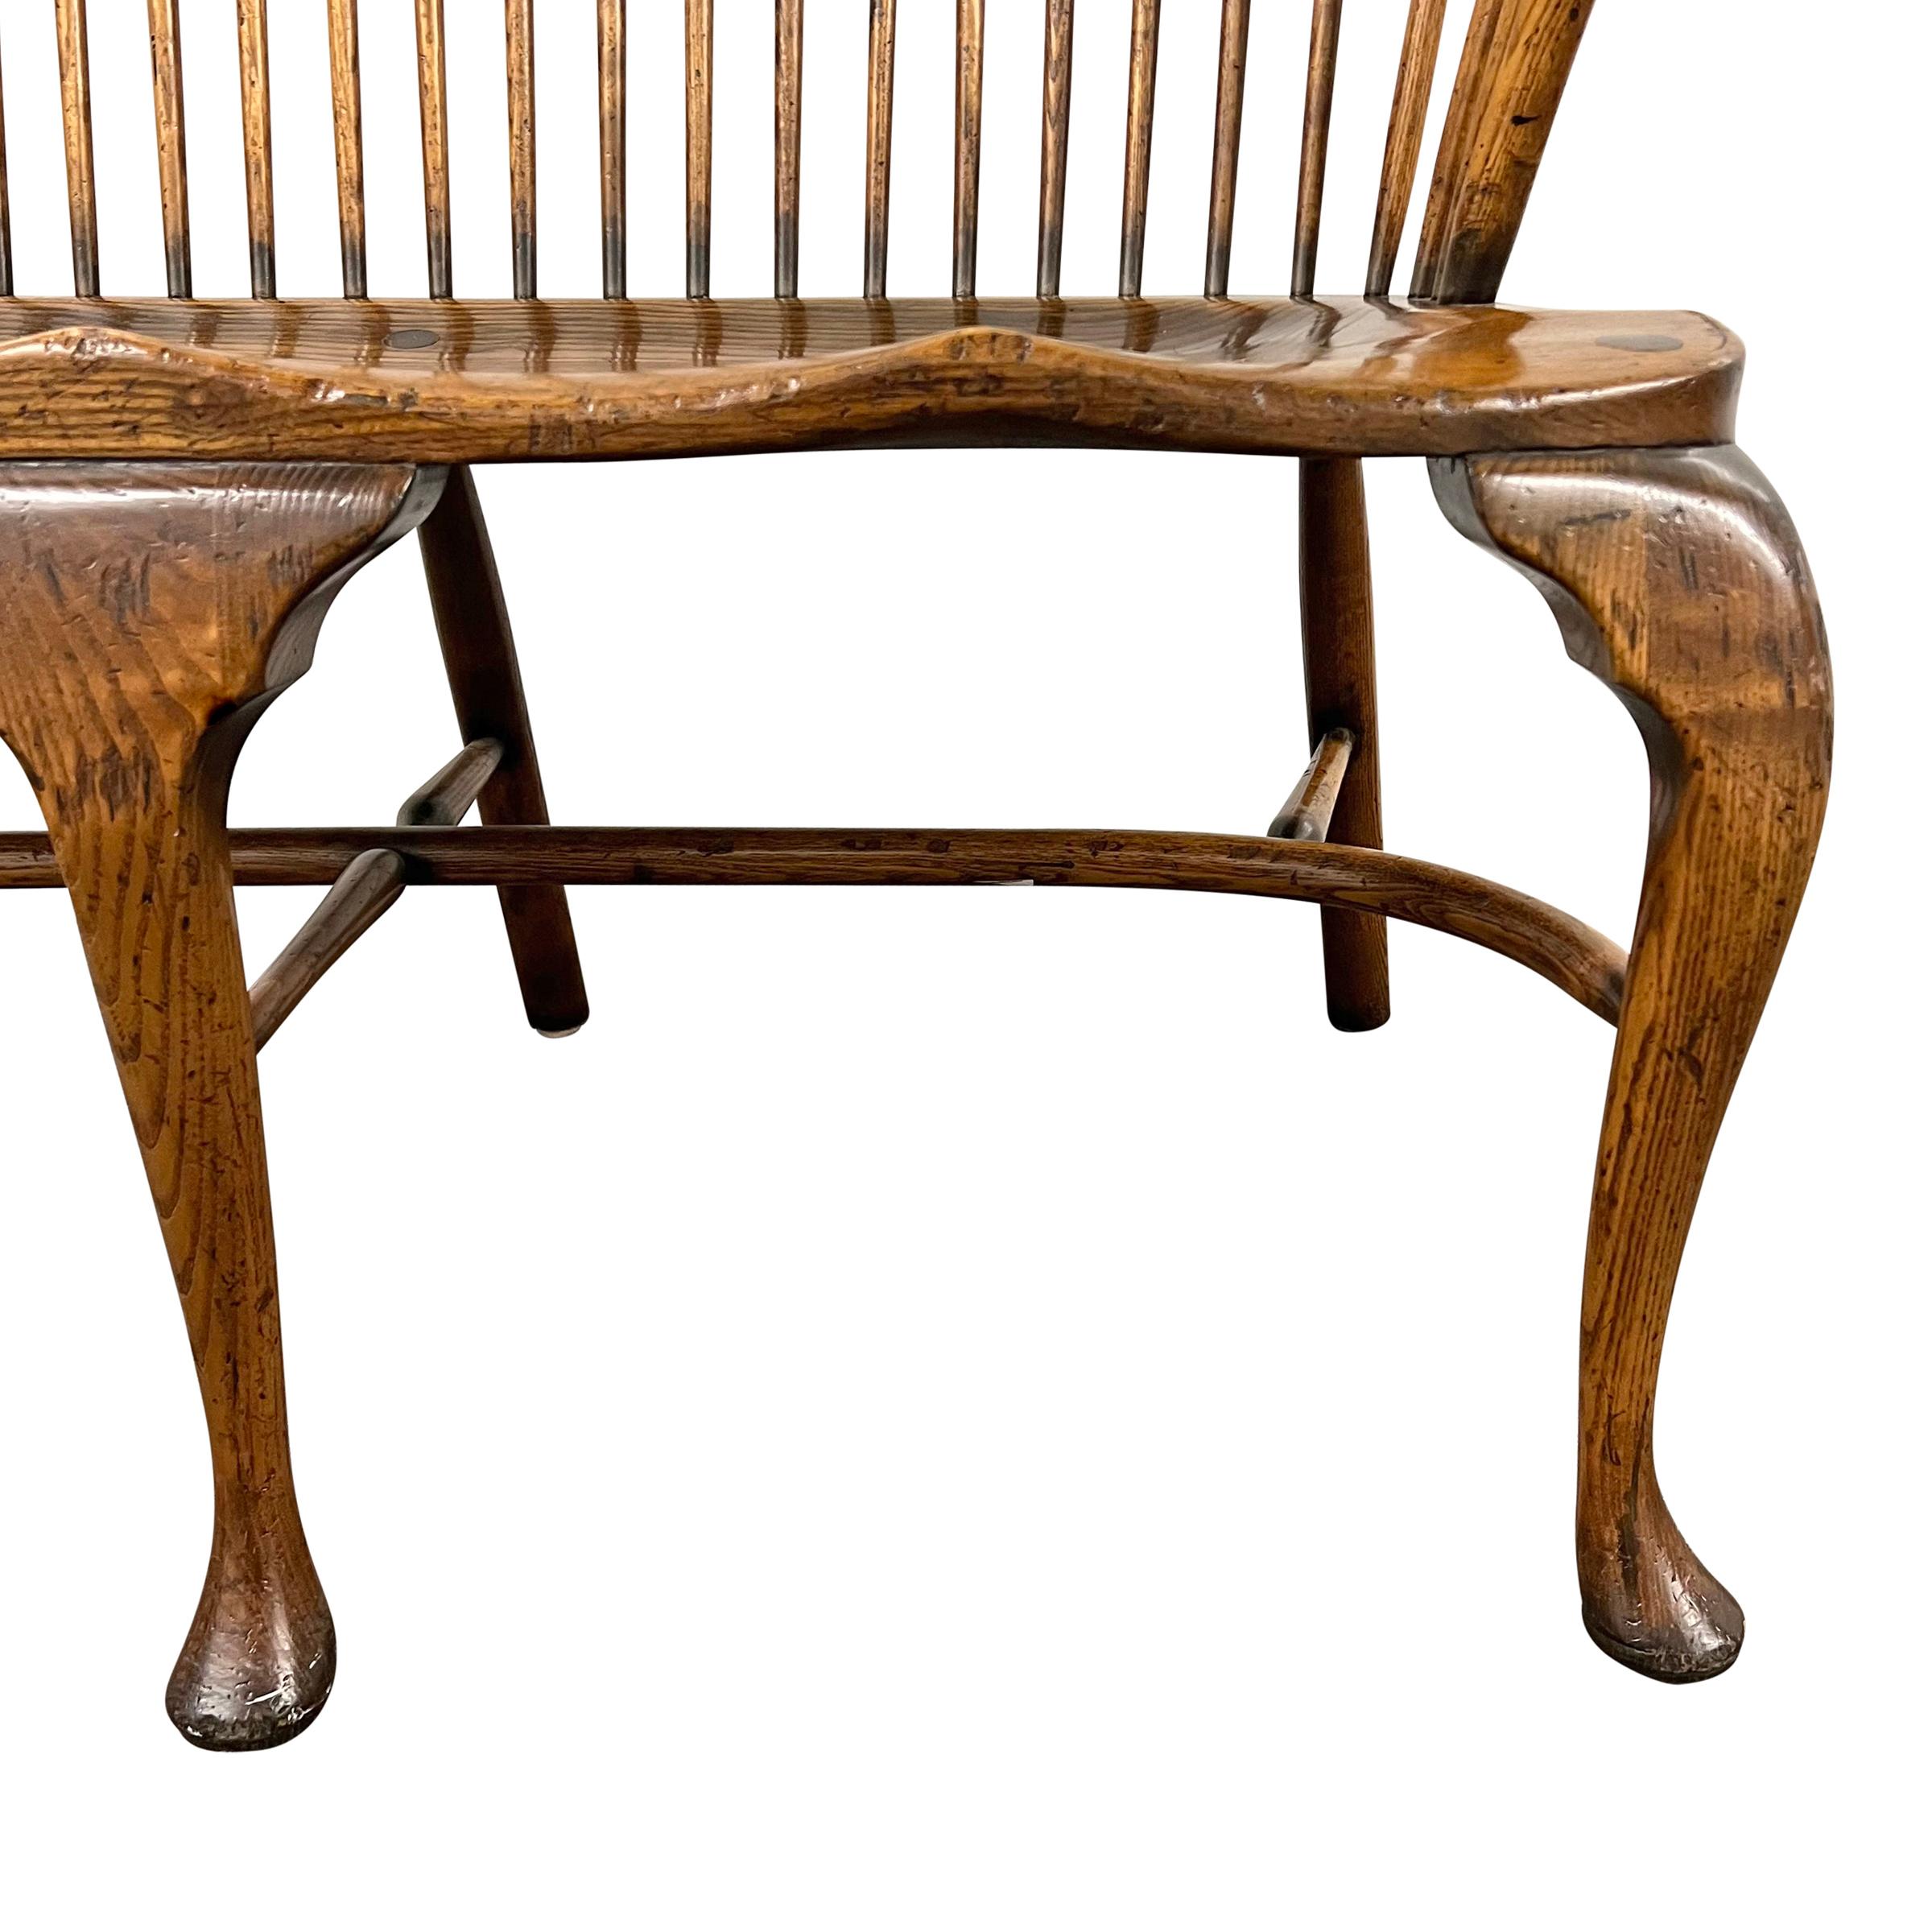 20th Century English Oak Sack-Back Bench For Sale 6